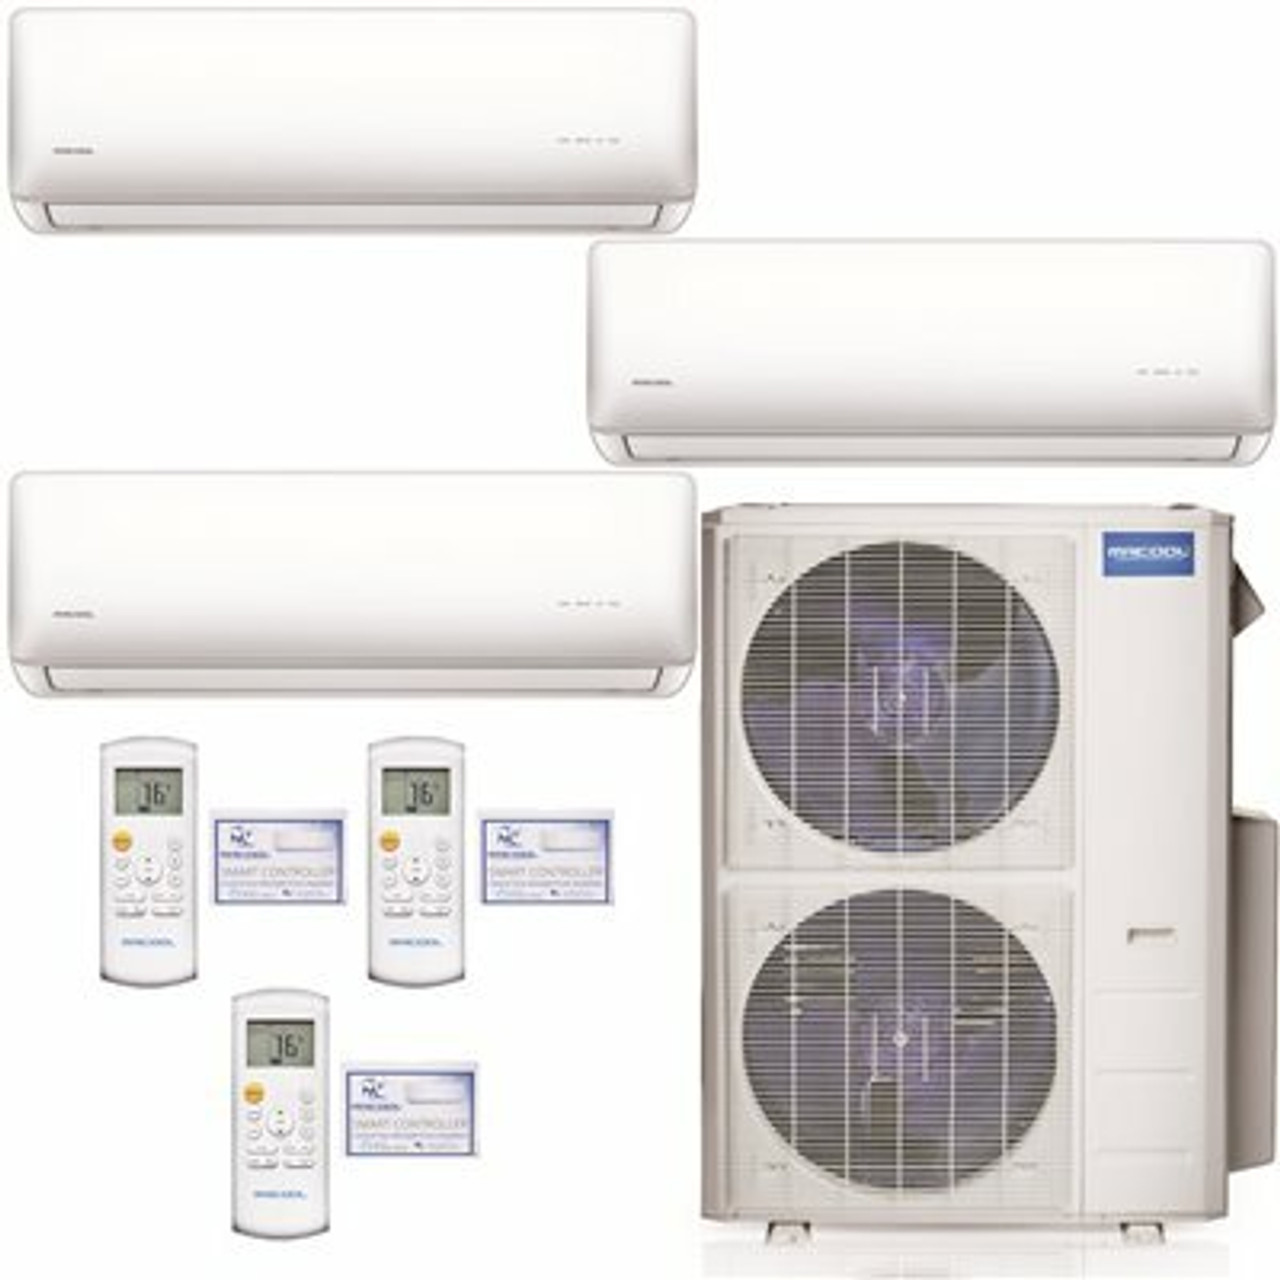 Mrcool Olympus 48,000 Btu 4 Ton 3-Zone Ductless Mini Split Air Conditioner And Heat Pump, 16 Ft. Install Kit - 230V/60Hz